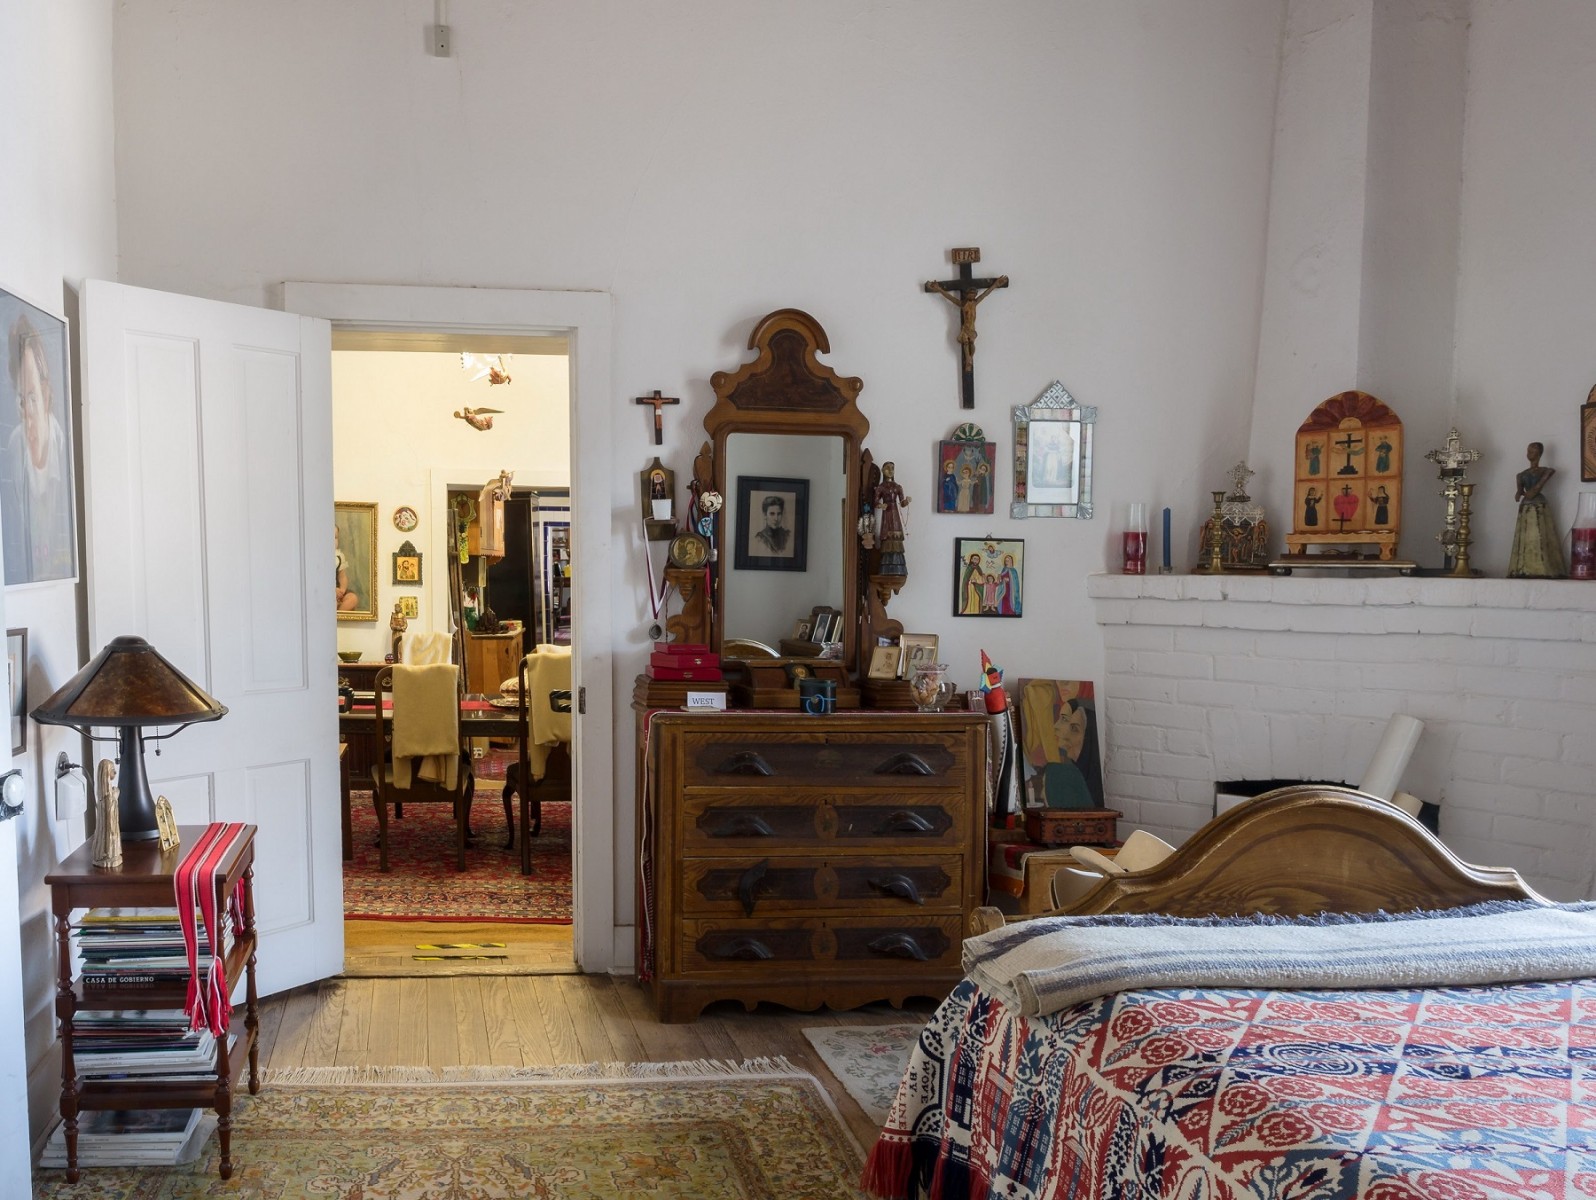 A small bedroom of the Taylor-Mesilla Historic Property. Photo by Tom Conelly.